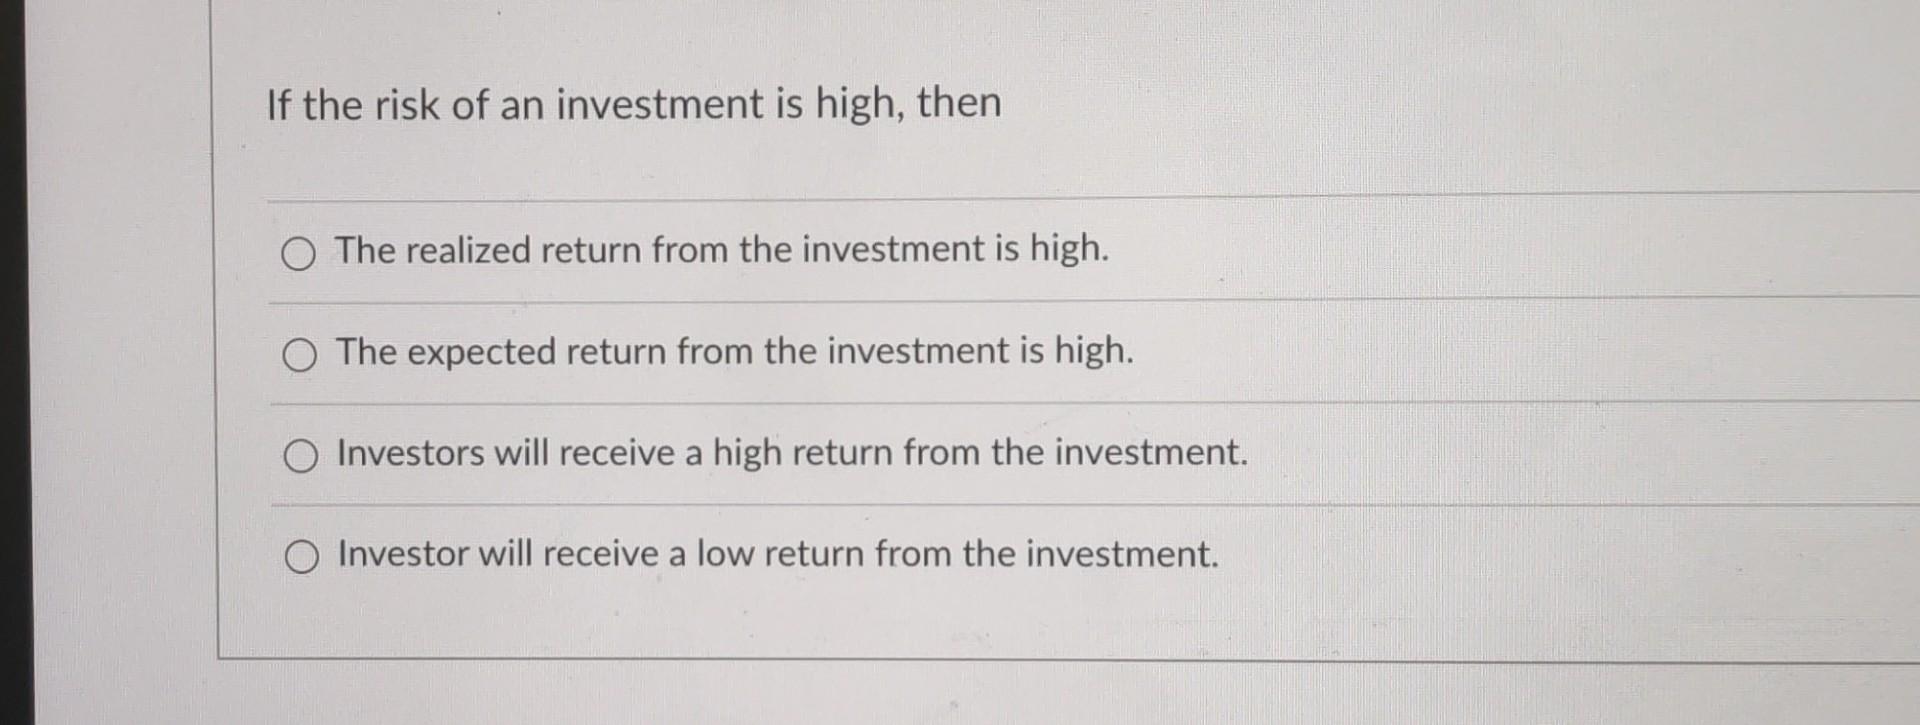 If the risk of an investment is high, then O The realized return from the investment is high. O The expected